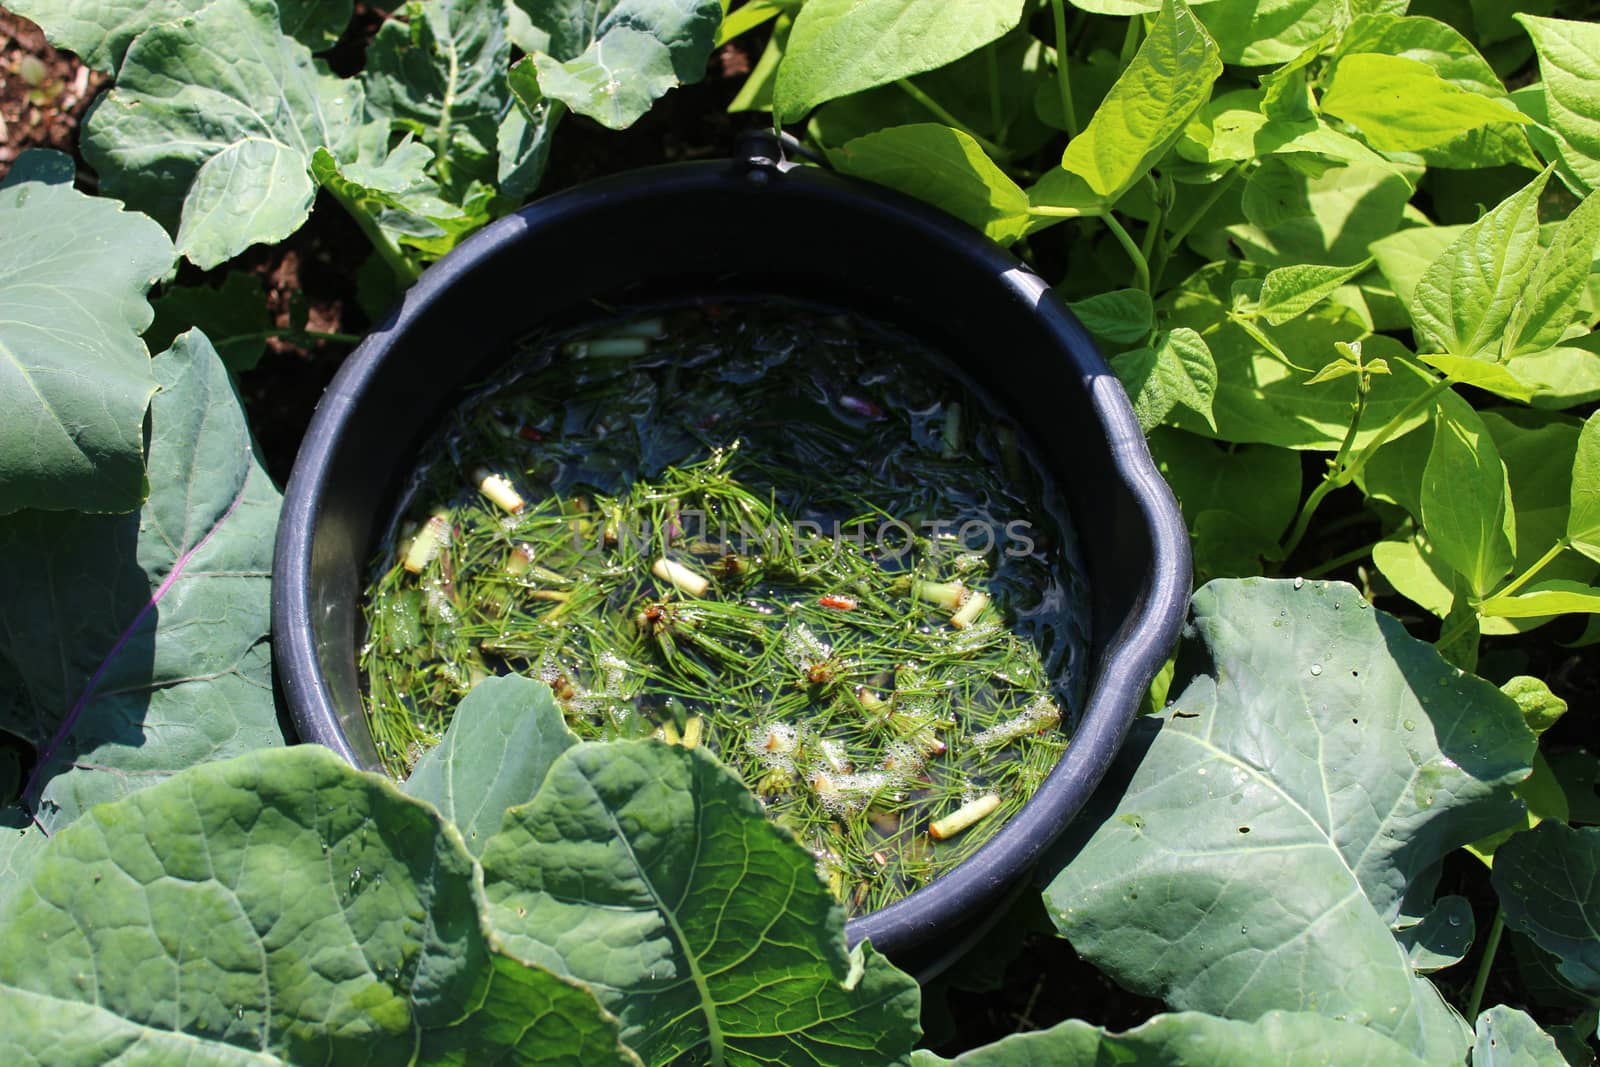 The picture shows liquid manure from herbs in the garden